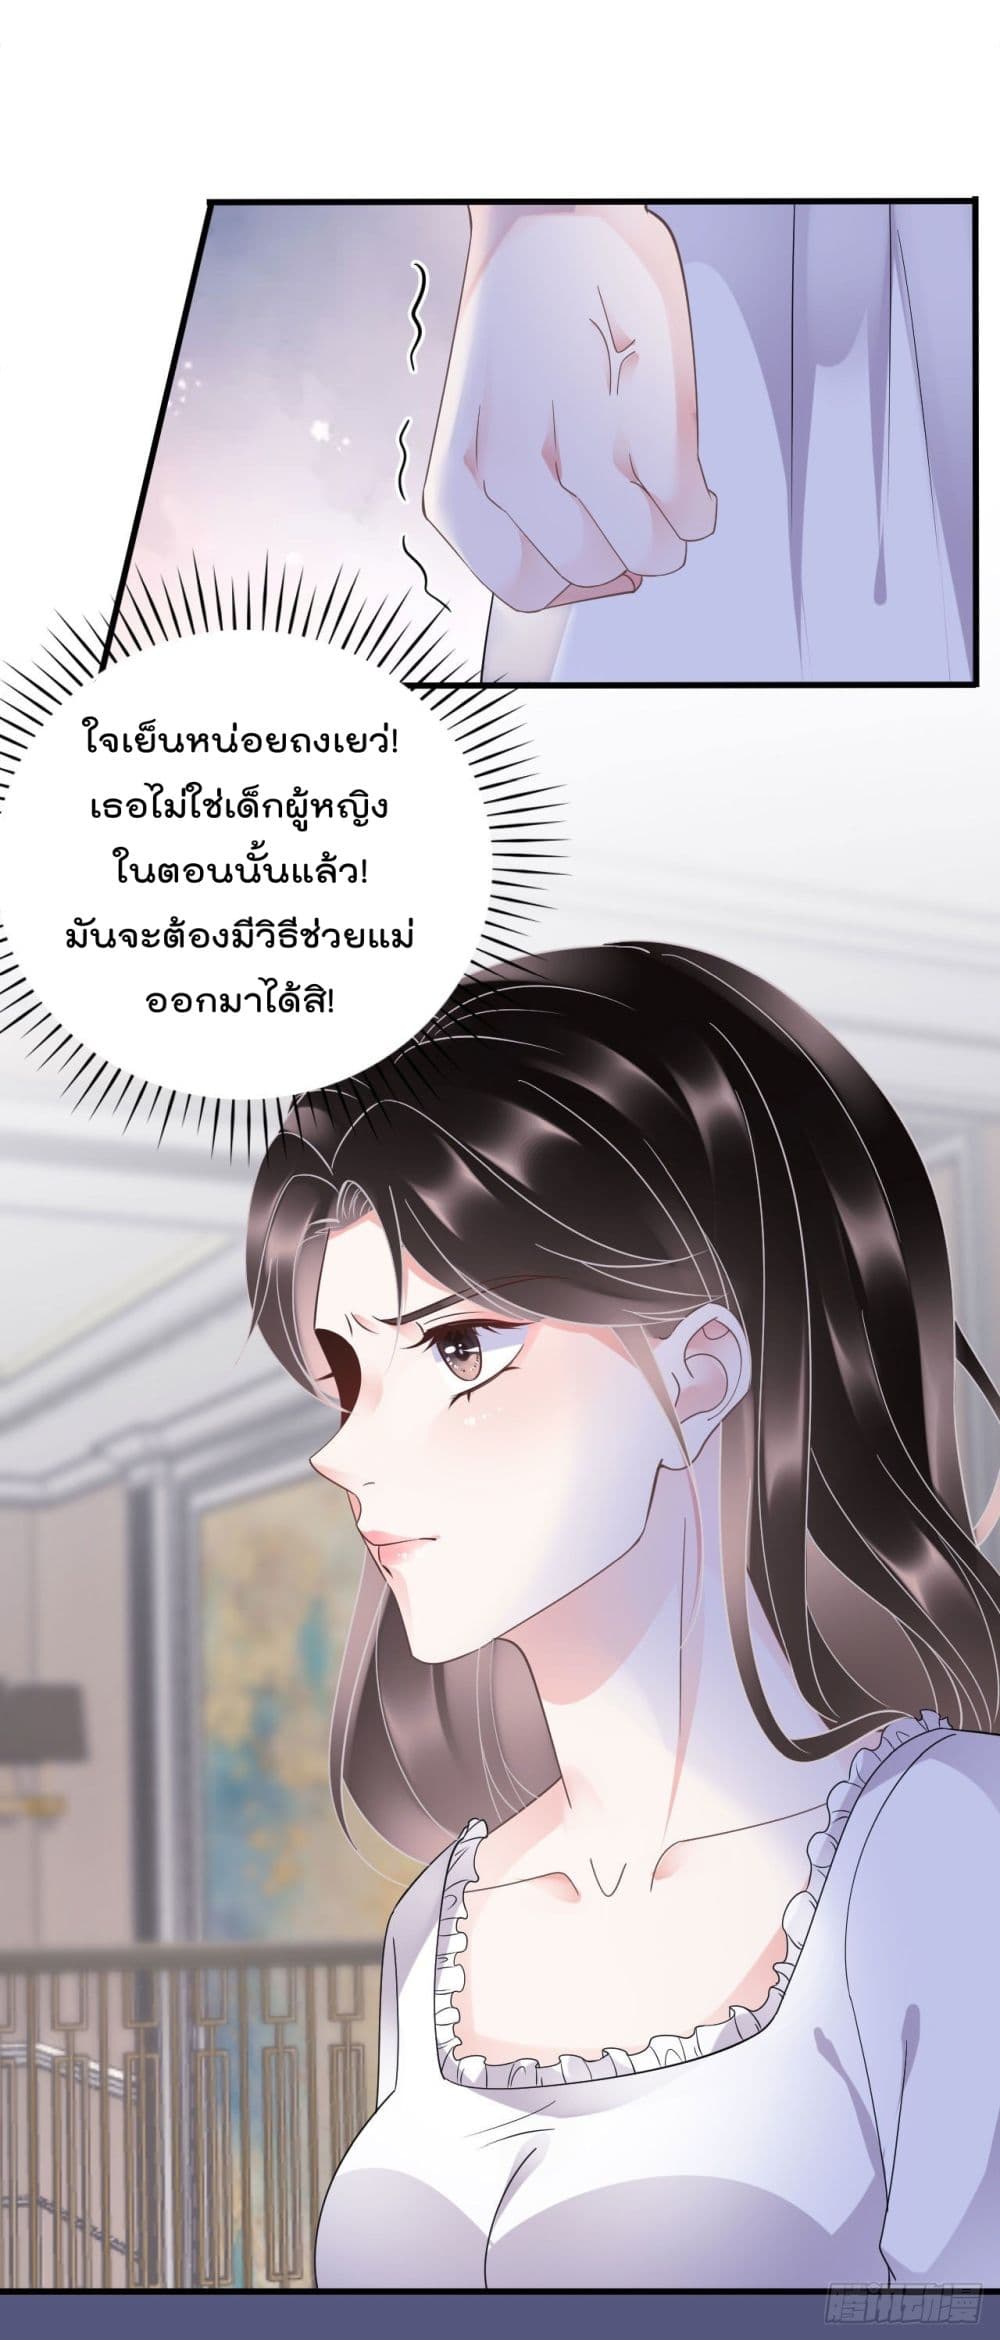 What Can the Eldest Lady Have คุณหนูใหญ่ ทำไมคุณร้ายอย่างนี้ 13-13